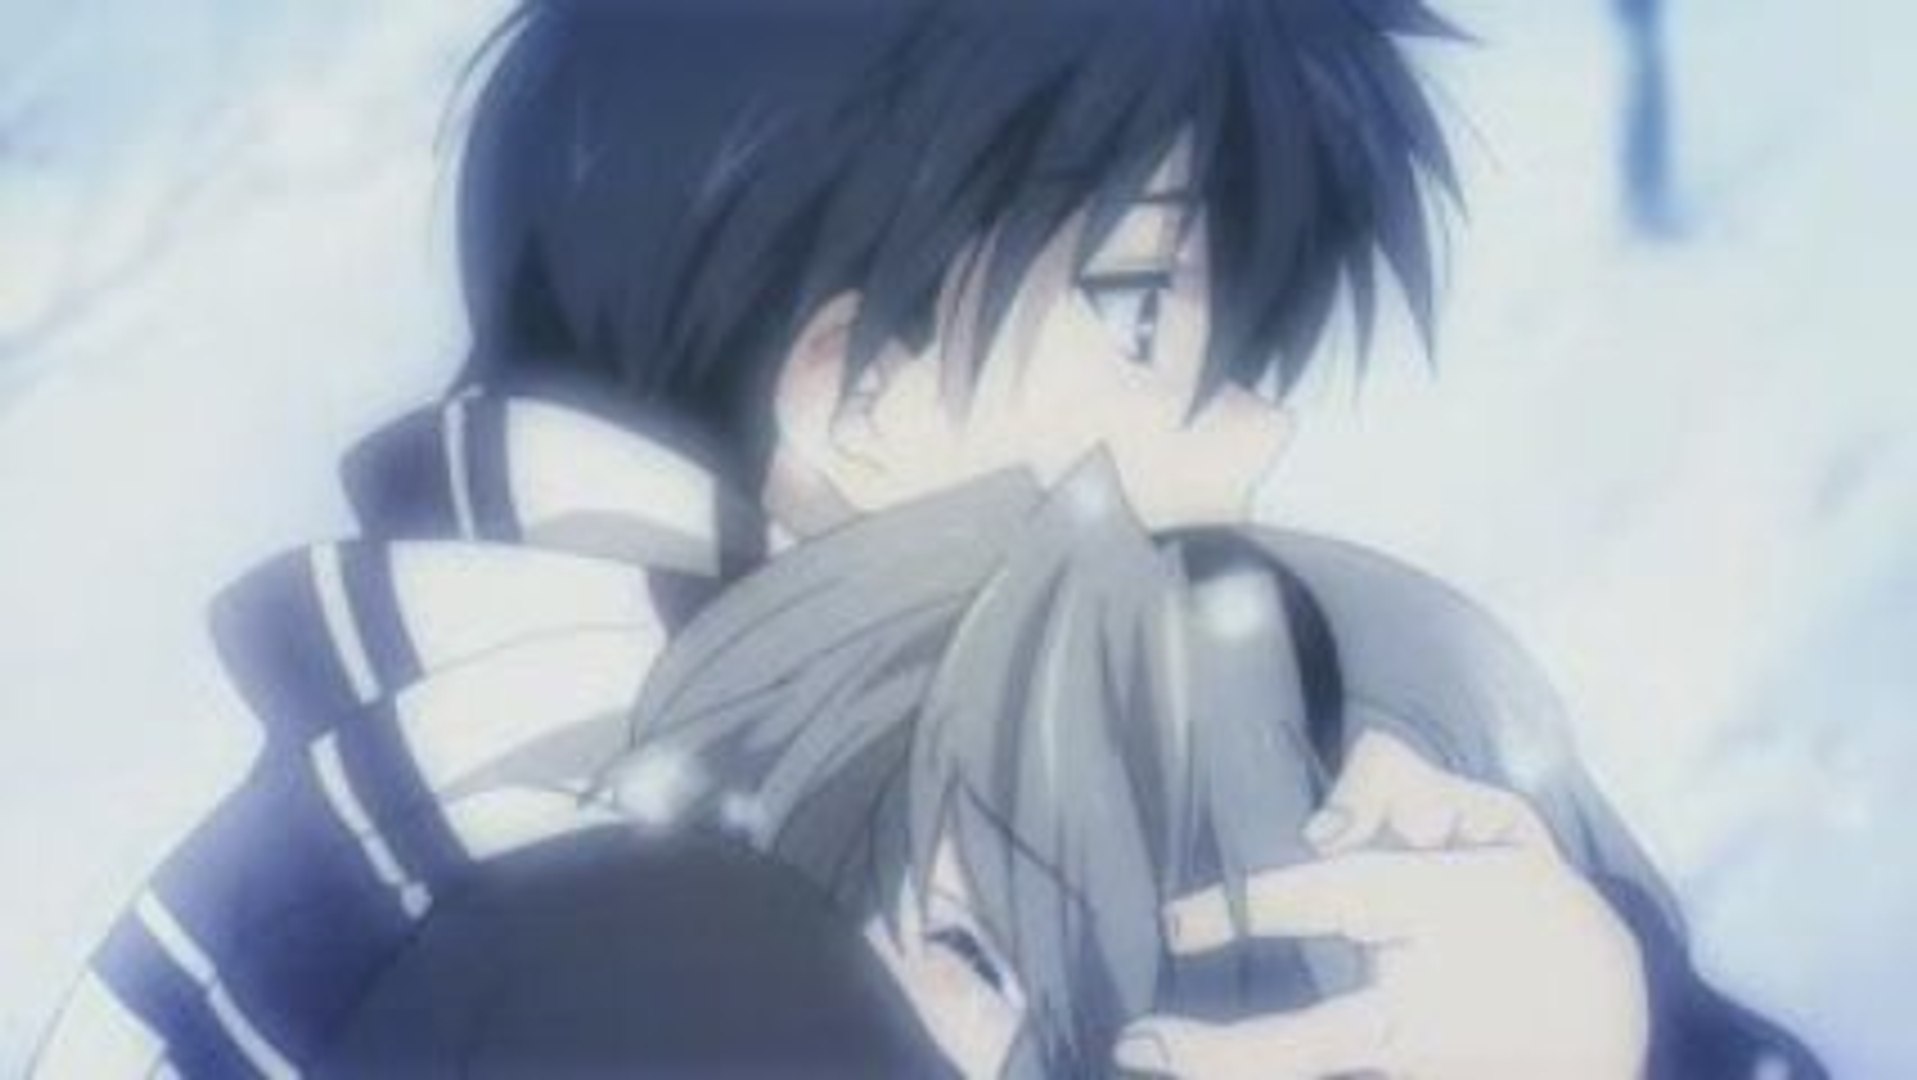 Clannad After Story Final Ending - video Dailymotion